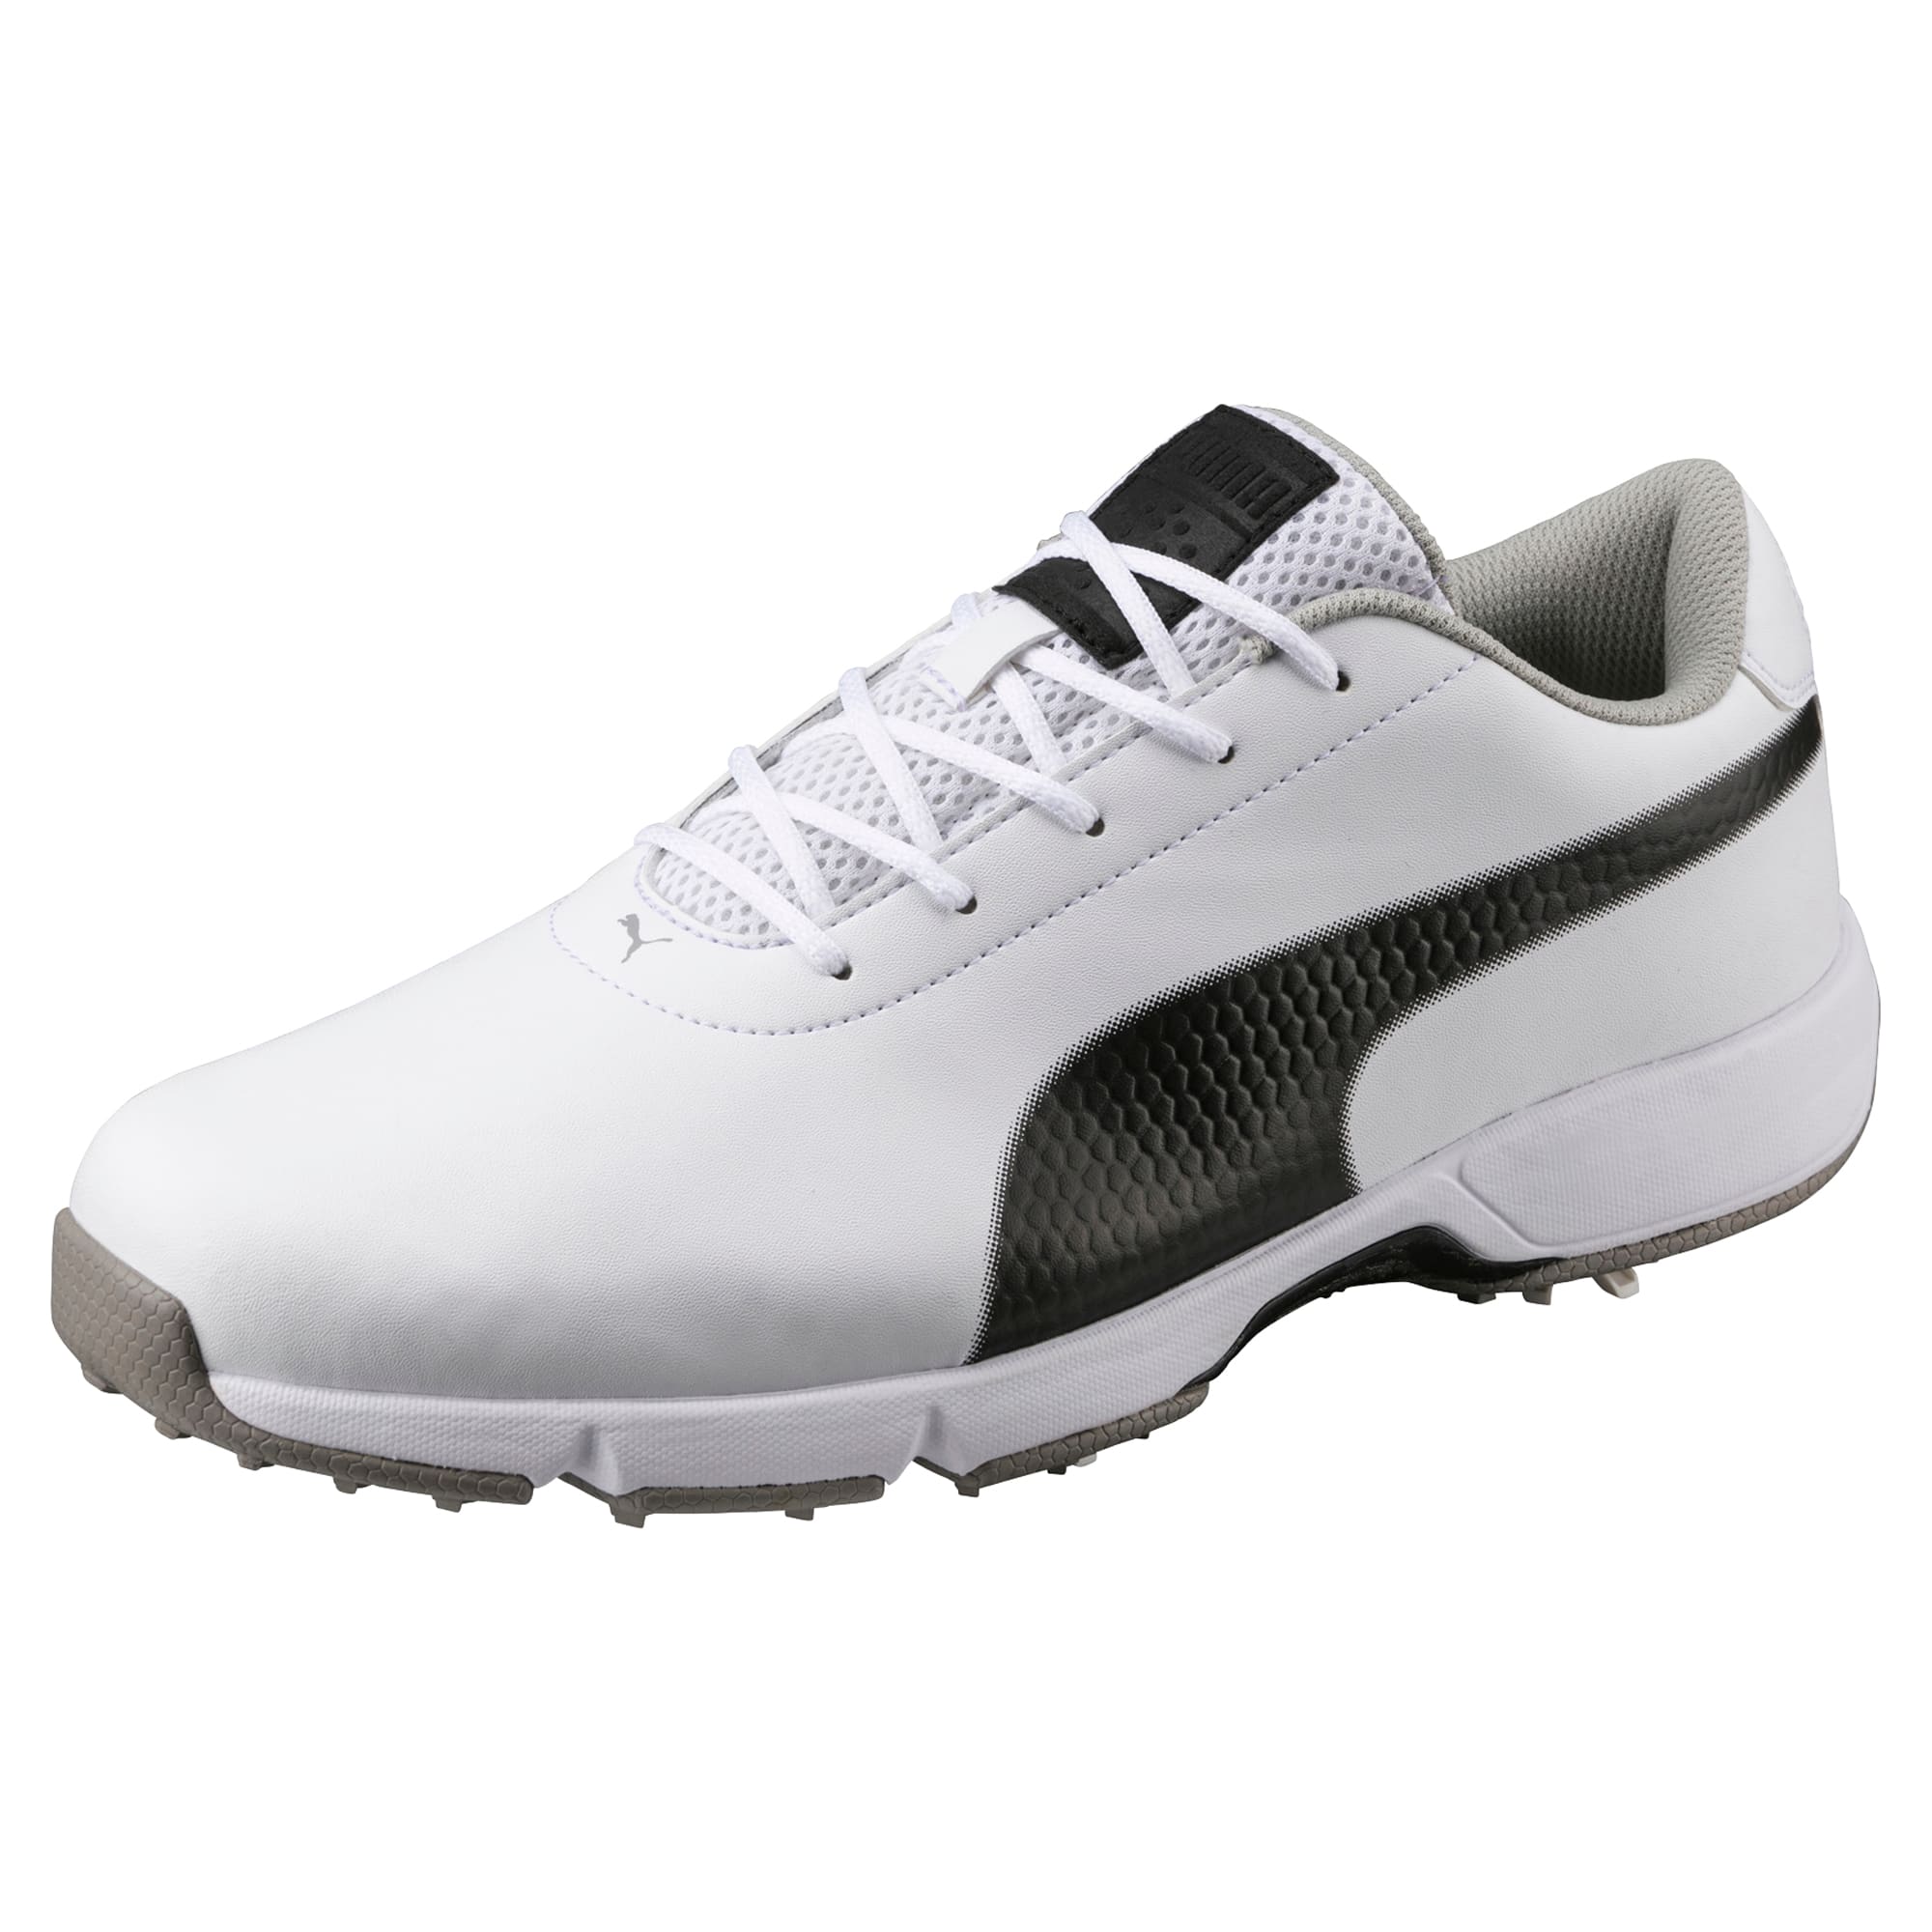 Cleated Classic Men's Golf Shoes | PUMA 